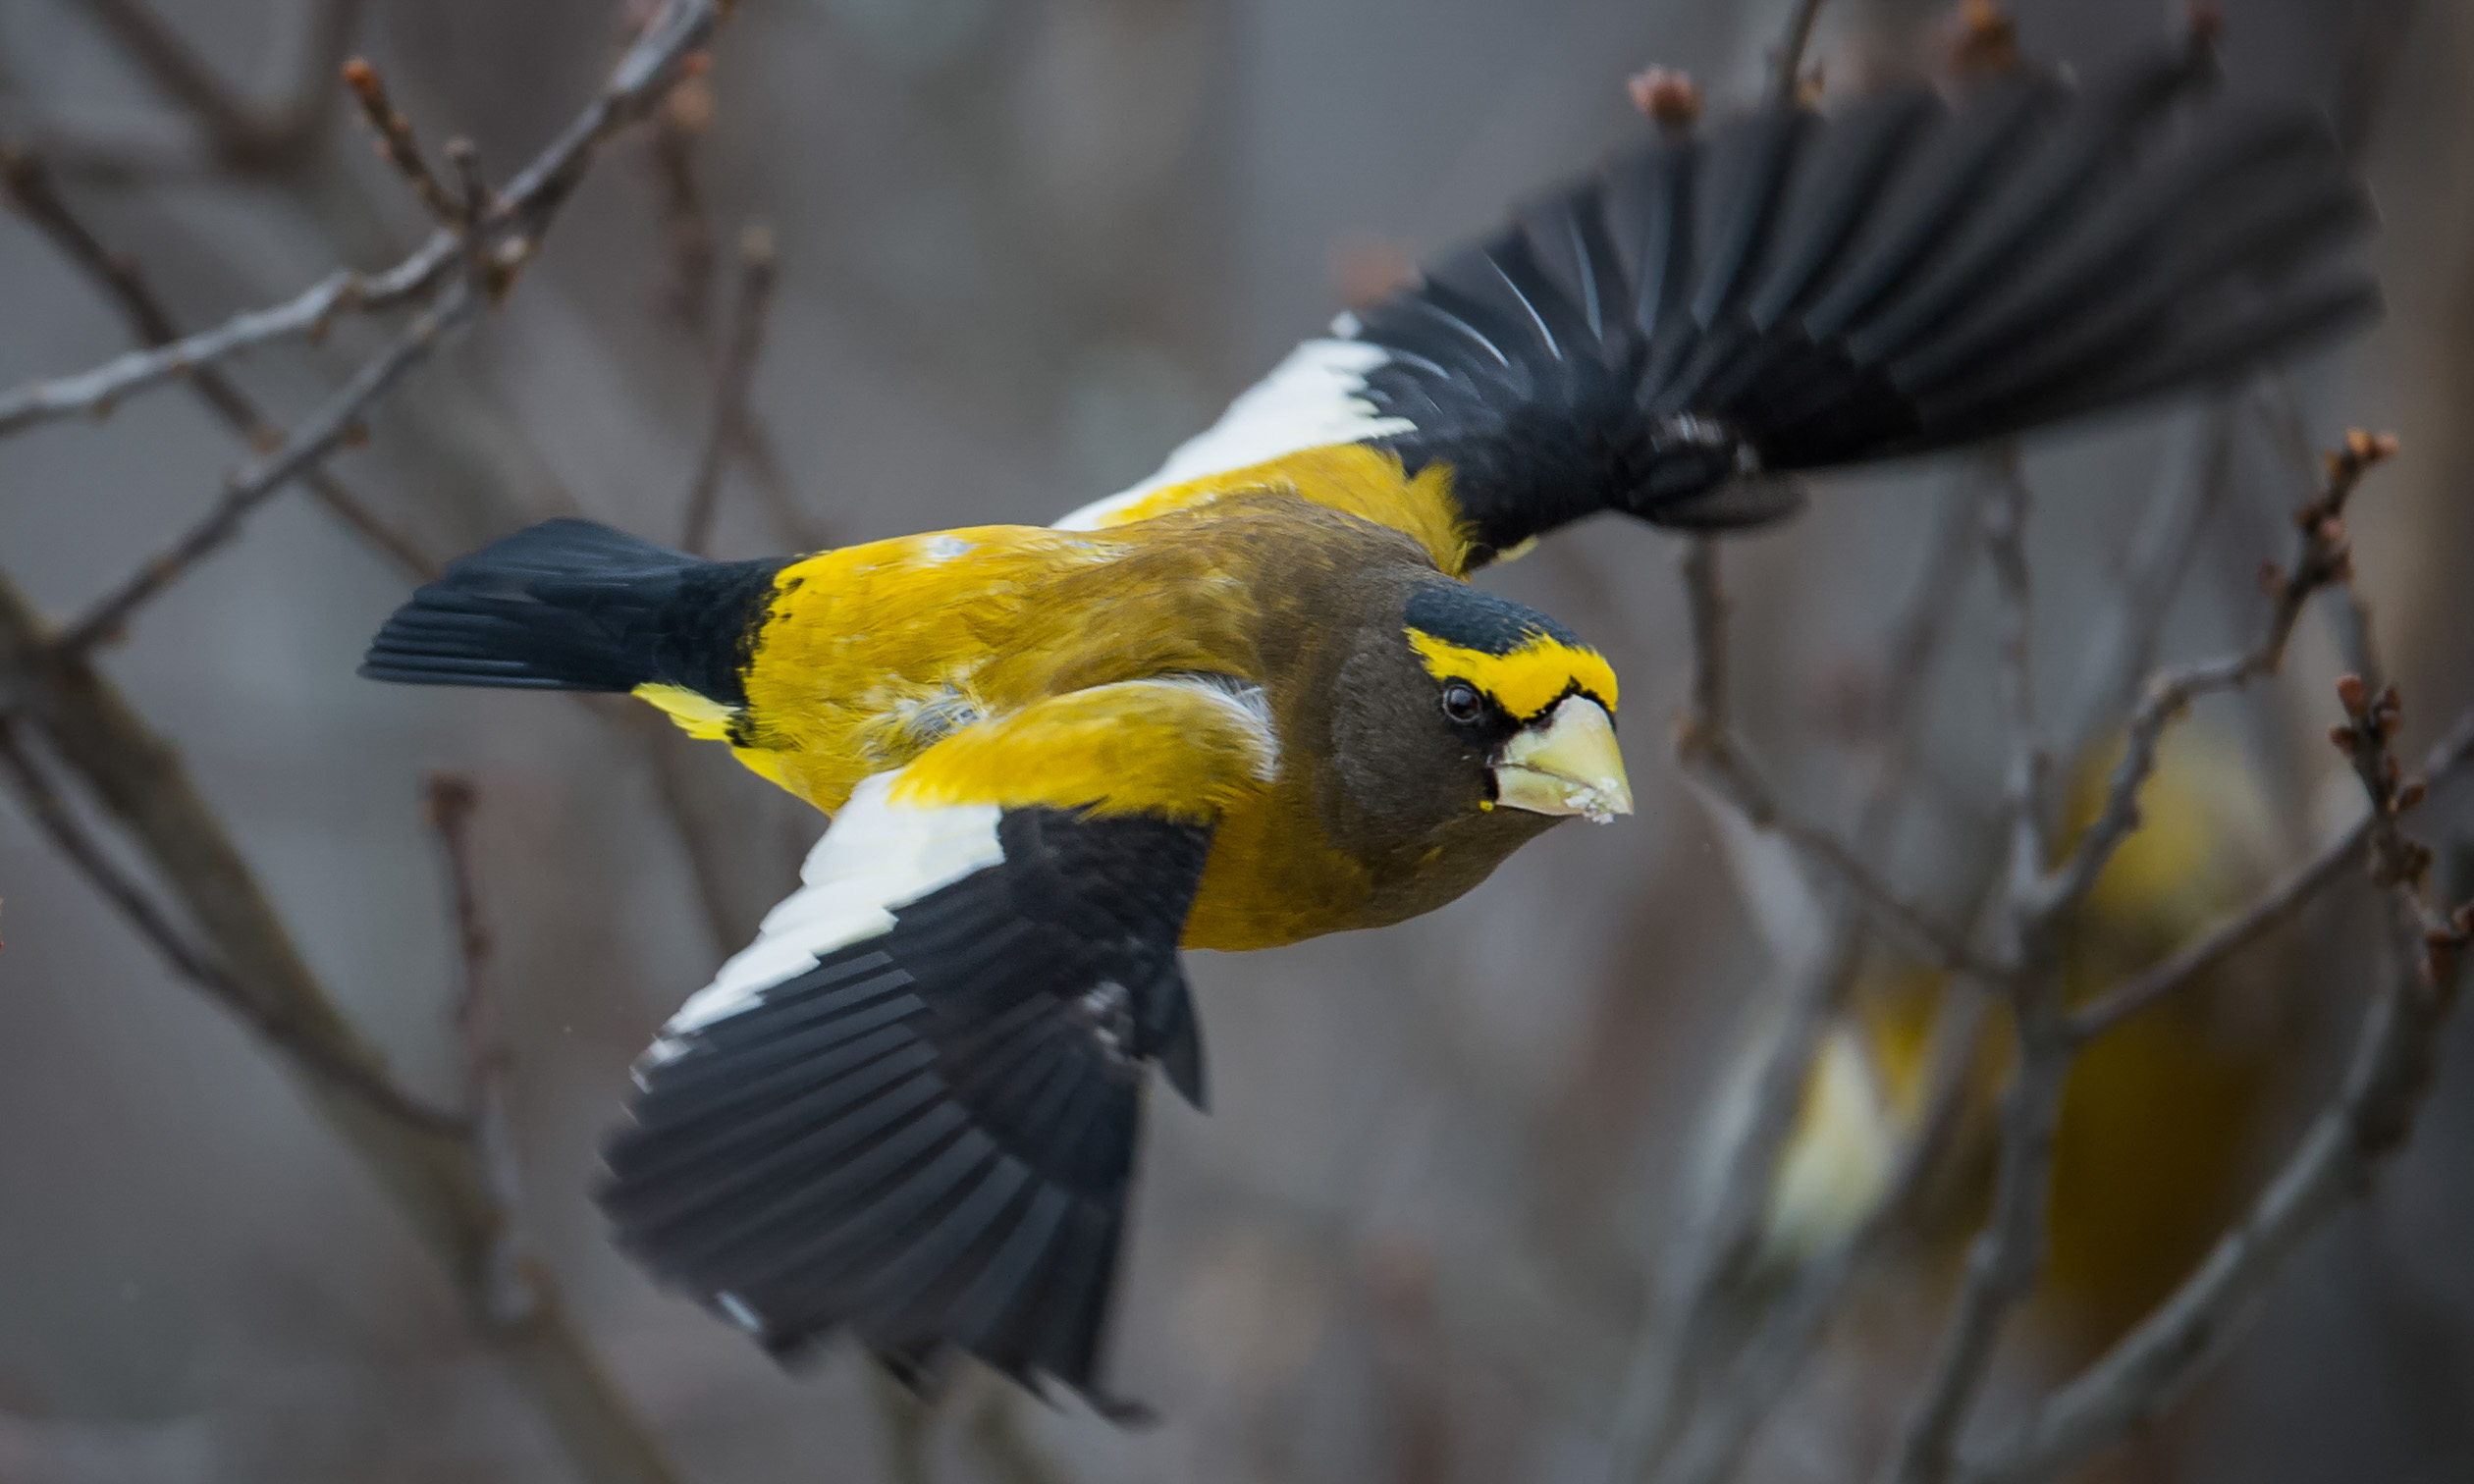 Christmas Bird Counters are always on the lookout for northern species like the Evening Grosbeak. Christmas Bird Count records of such species allow conservation scientists to document changes in their populations over time. Photo: Bea Binka